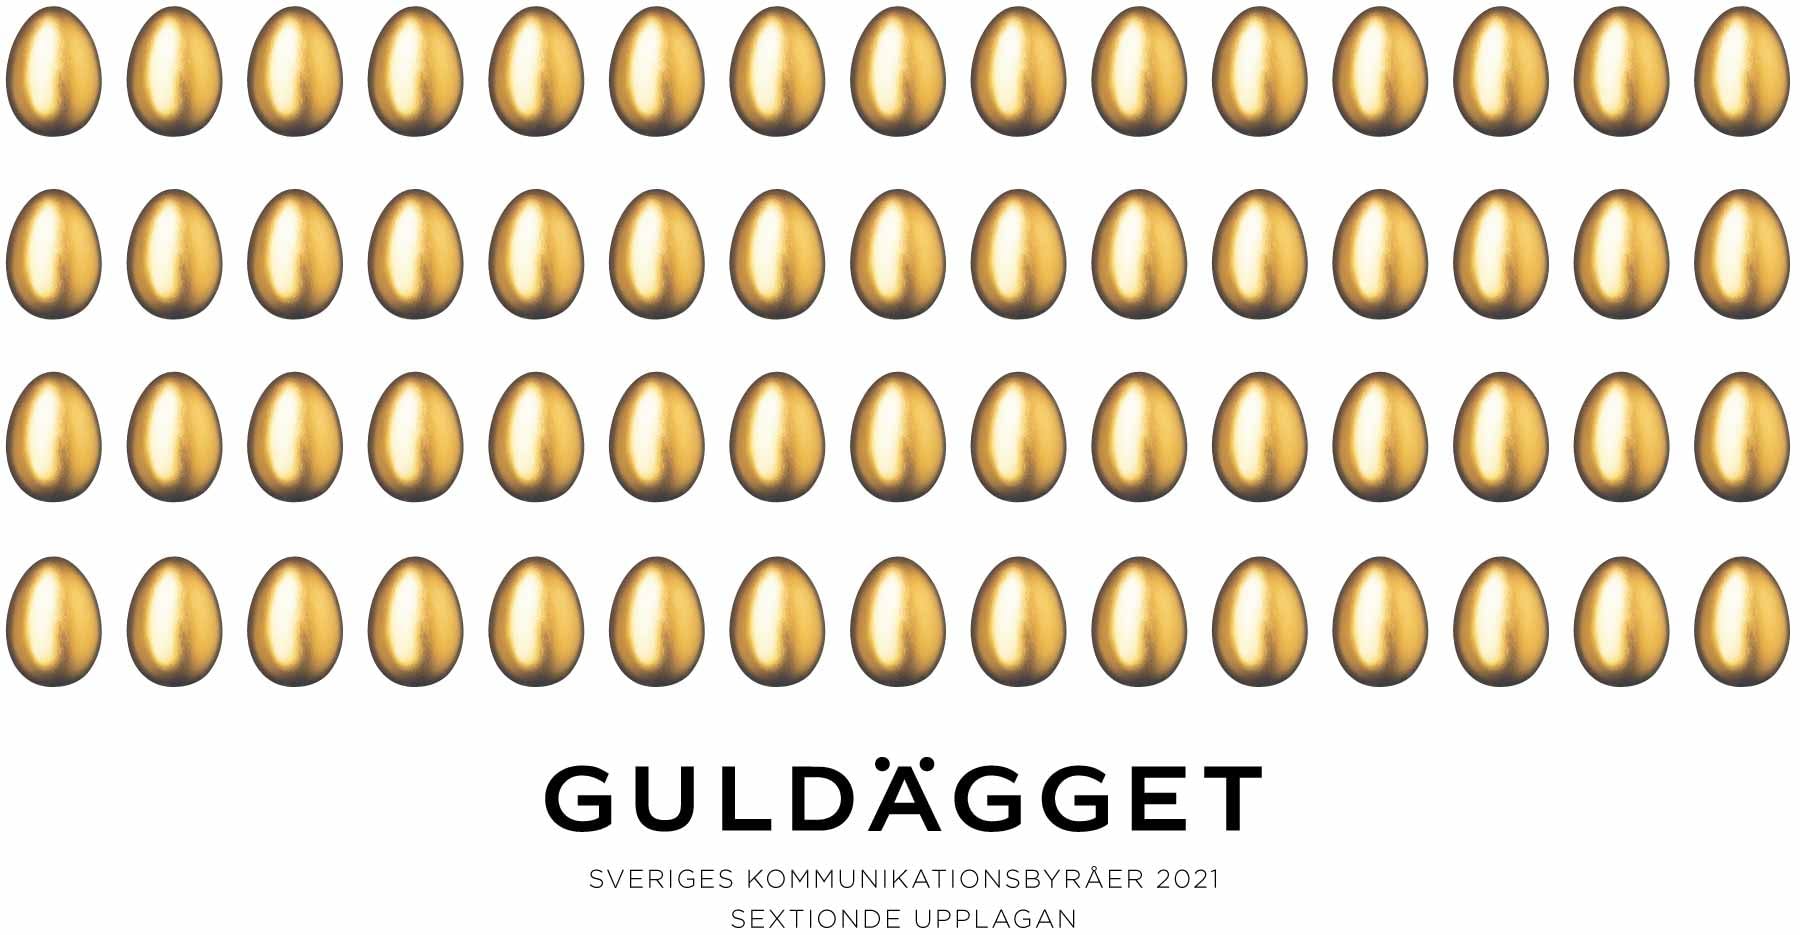 Guldägget turning 60 years – Framme one their production partners